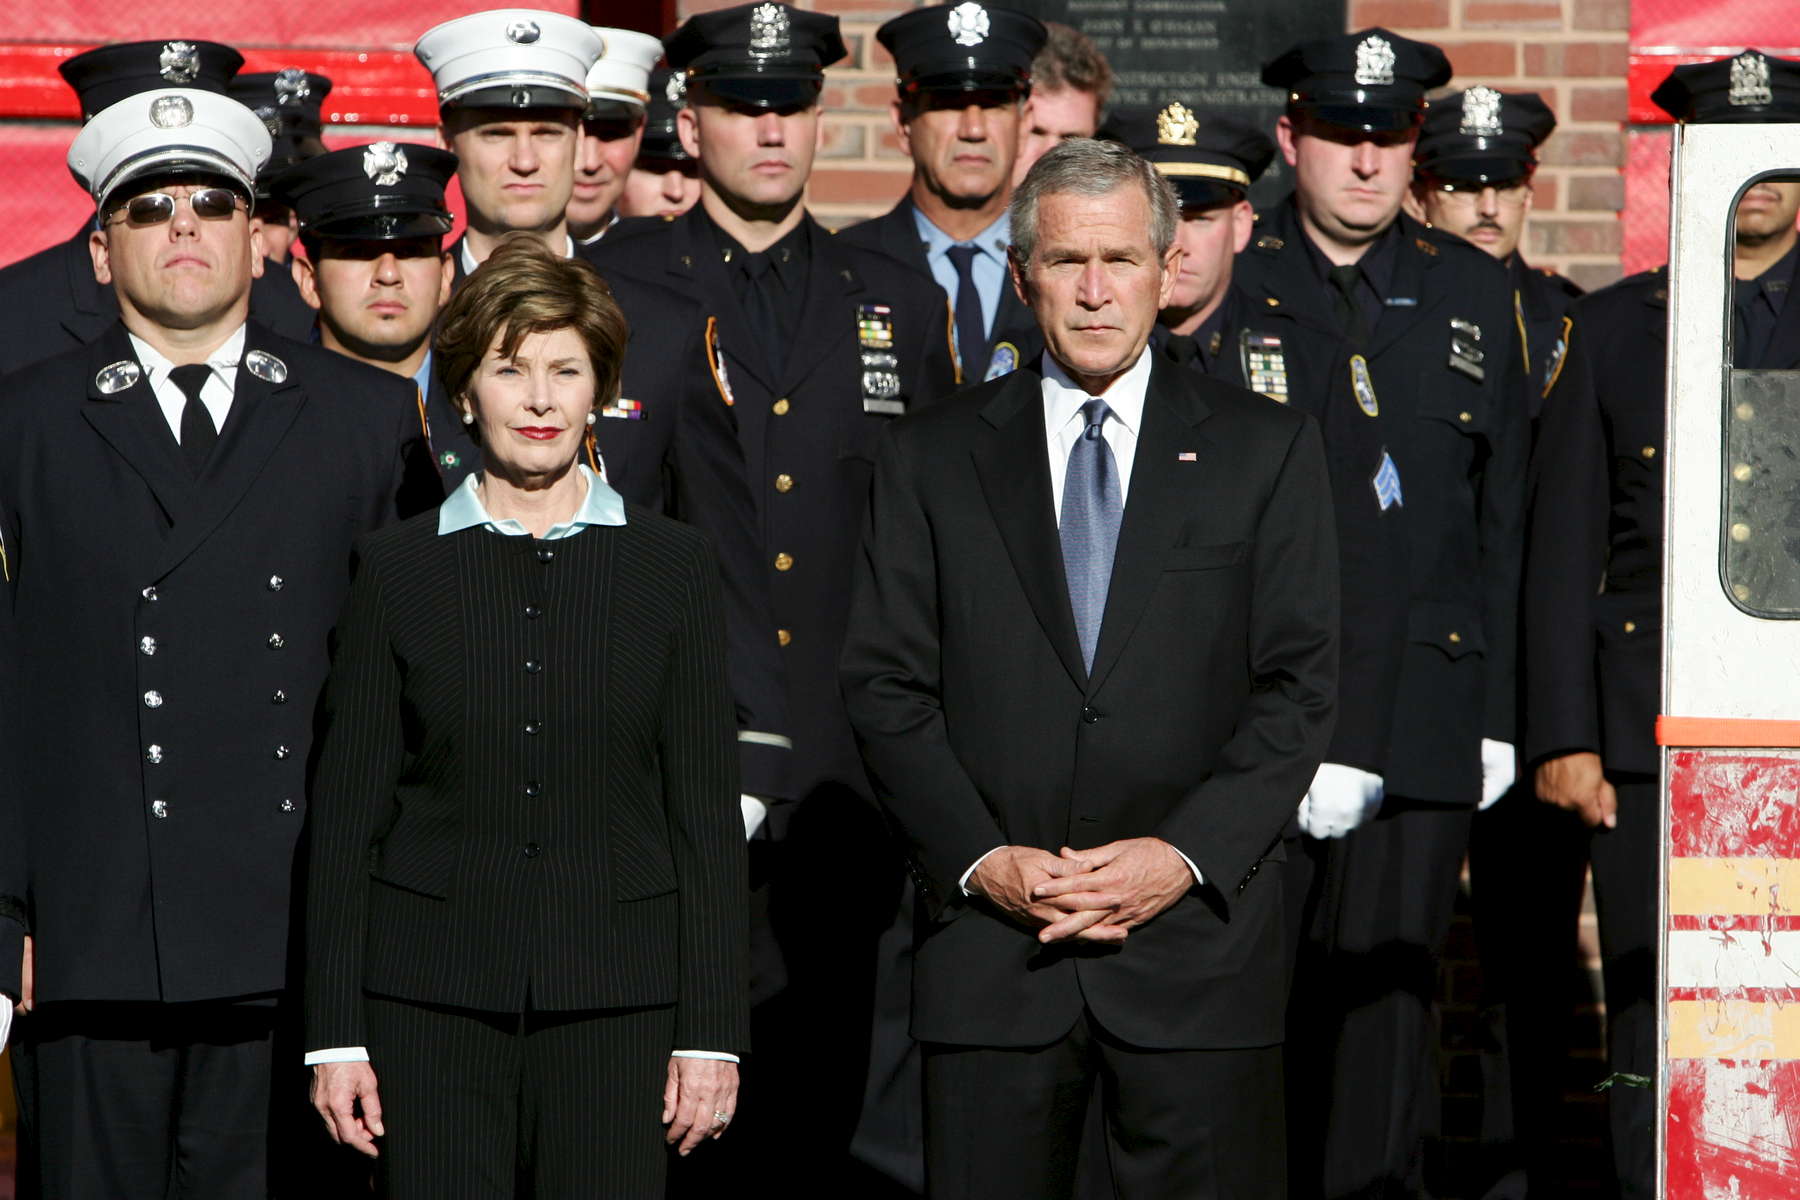 United States President George W. Bush and First Lady Laura Bush attend the 9-11 Tribute Ceremony honoring first responders outside Engine 15 Ladder 18 4th Battalion Chief Fire Station at 25 Pitt Street in Manhattan on Monday September 11, 2006. The President and First Lady spent their breakfast with first responders after attending the somber ceremony. 